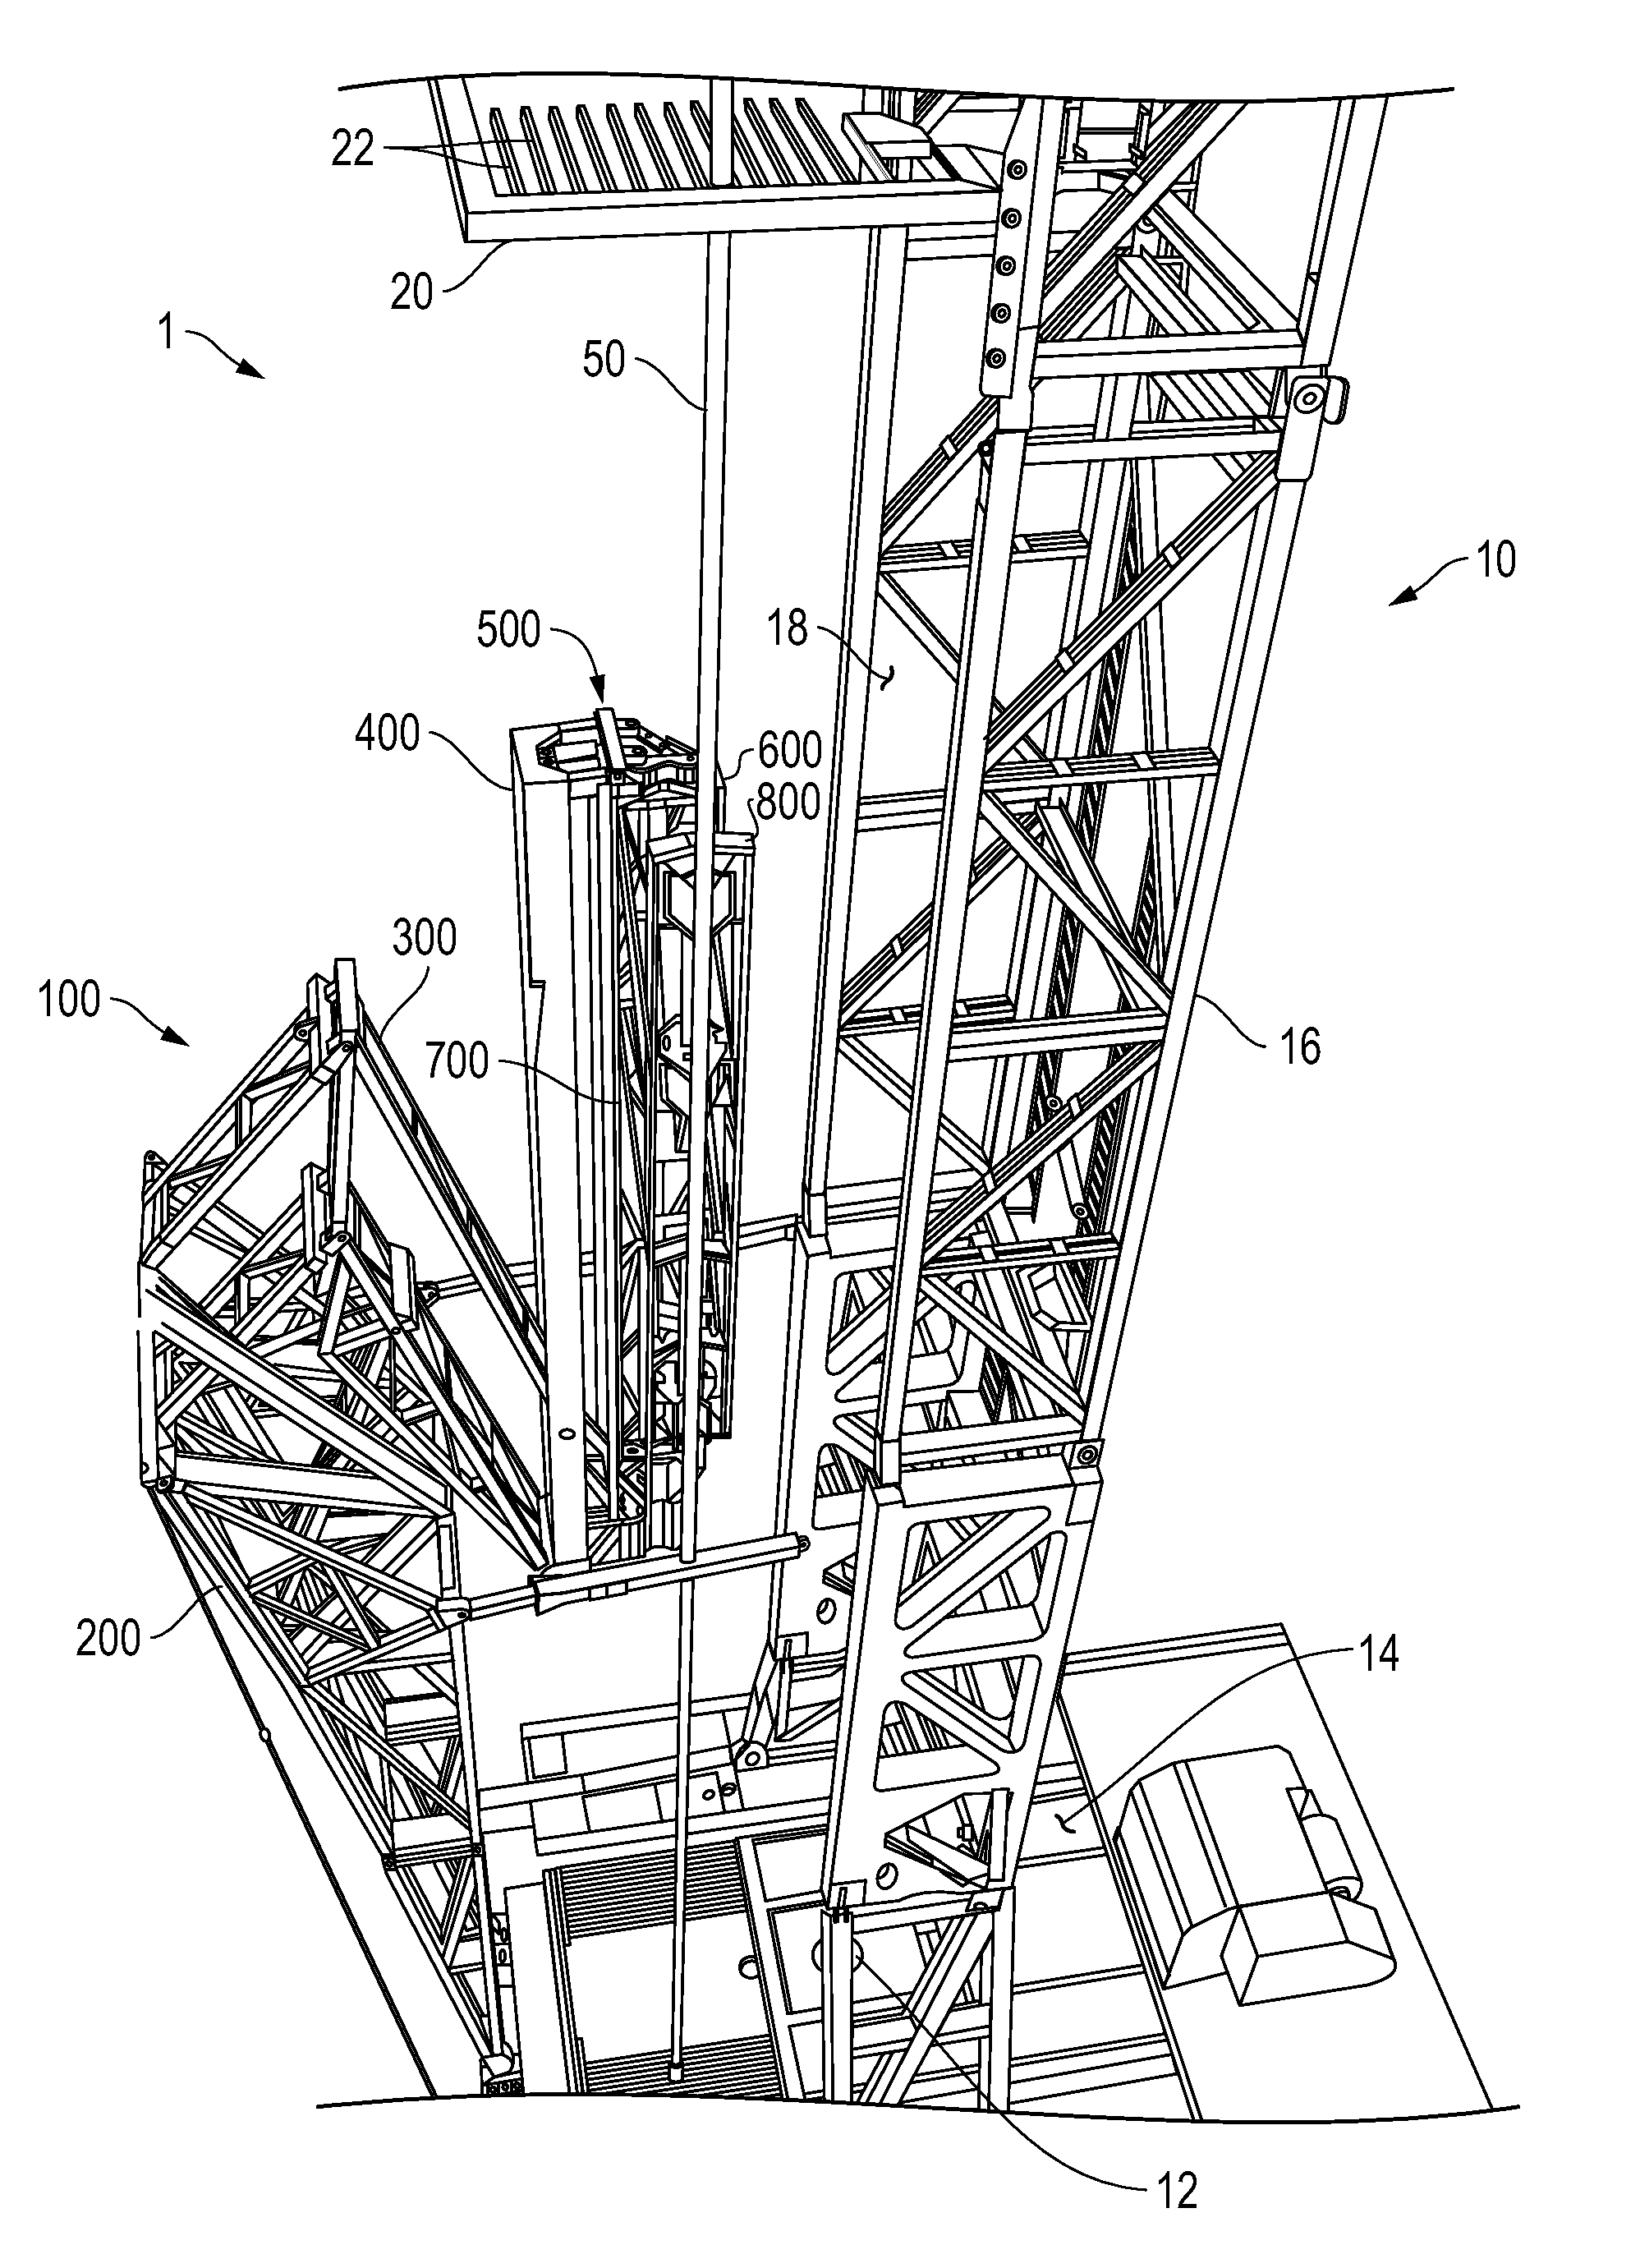 Tubular Stand Building and Racking System